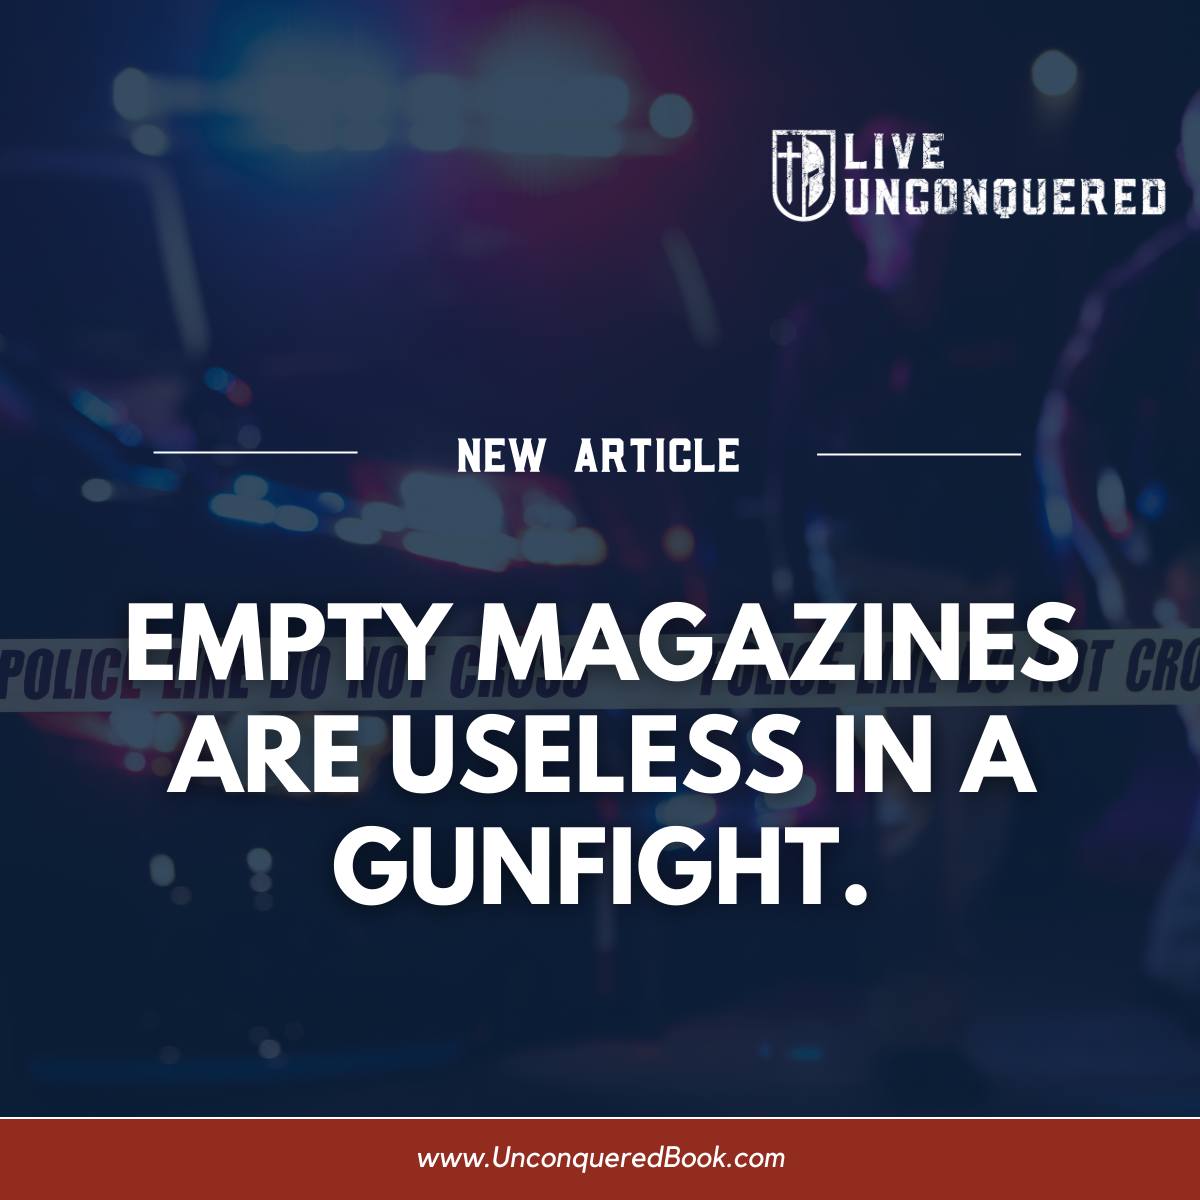 Empty Magazines Are Useless in a Gunfight